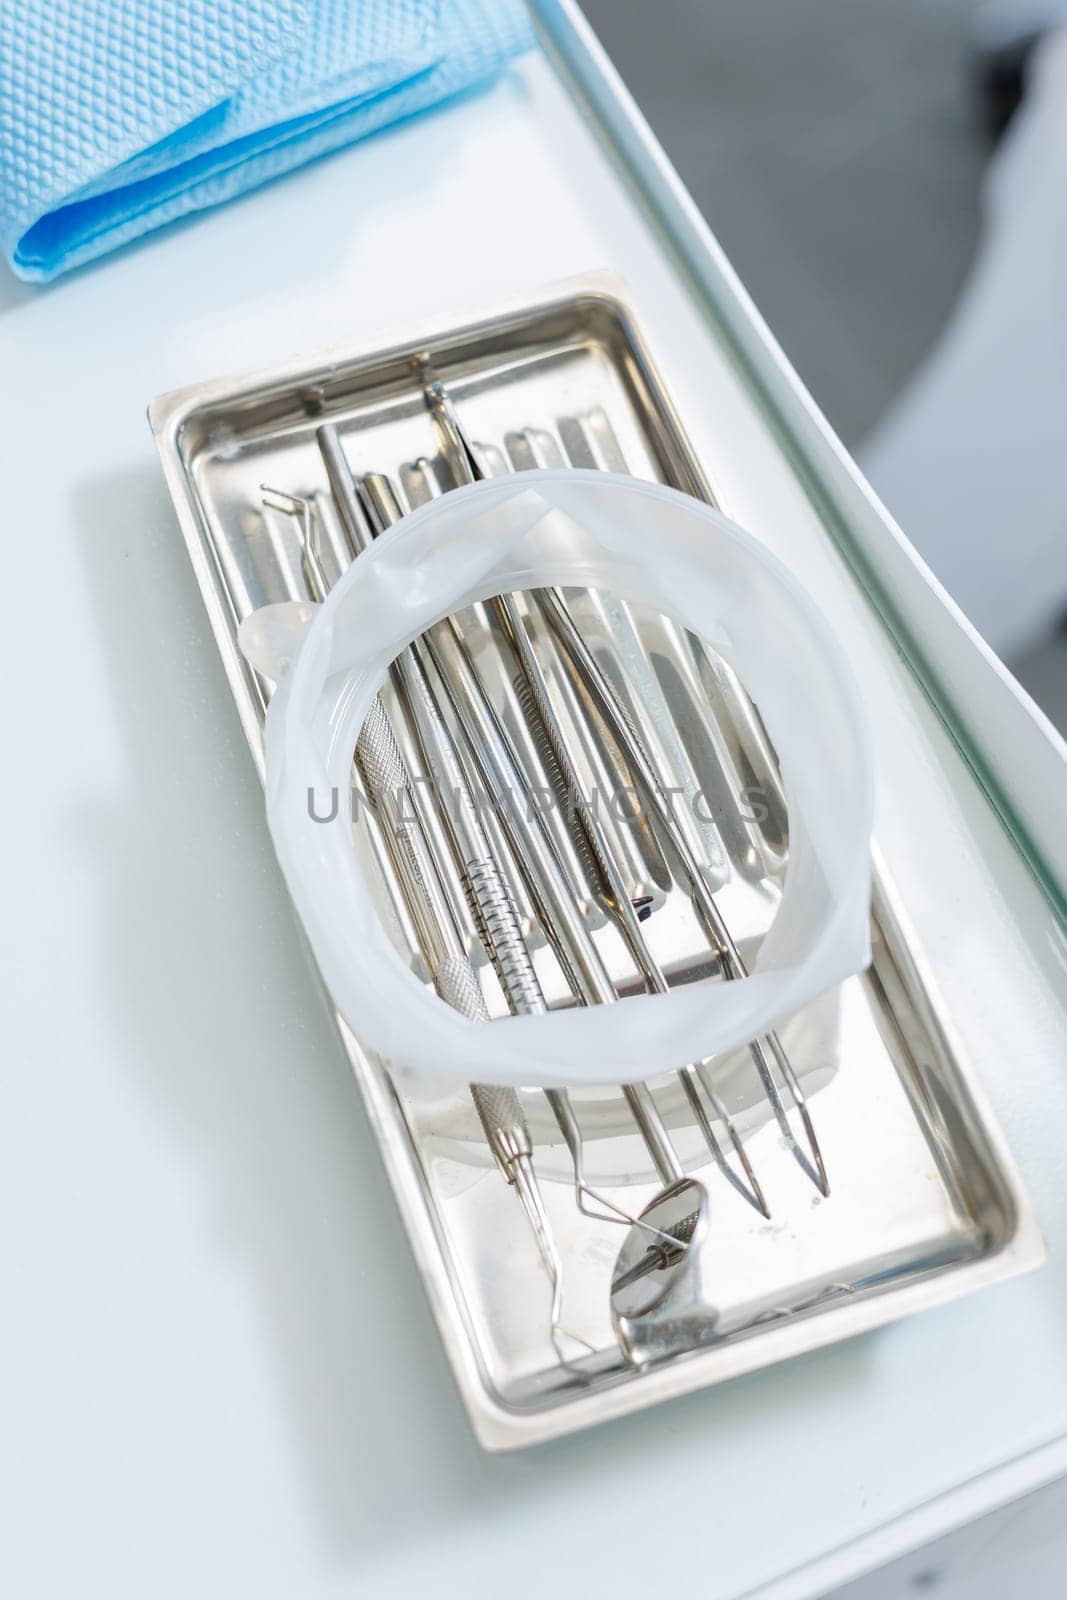 Tray with metal dental tools. Tools of the dentist. Interior of a patient reception room with dental equipment in a dental clinic.